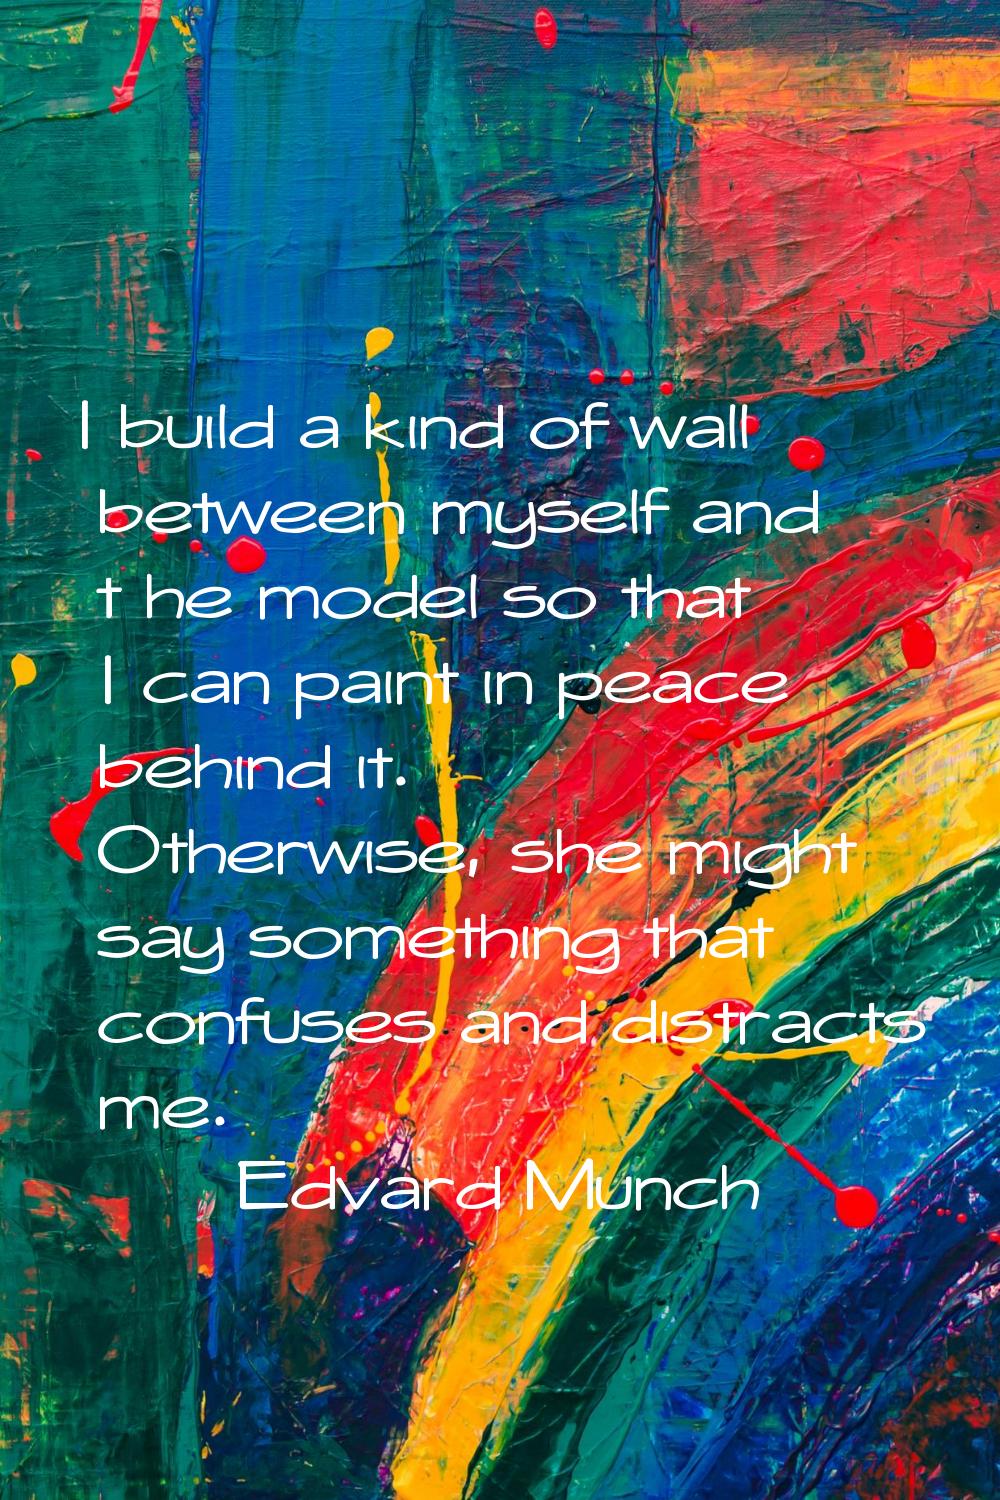 I build a kind of wall between myself and t he model so that I can paint in peace behind it. Otherw